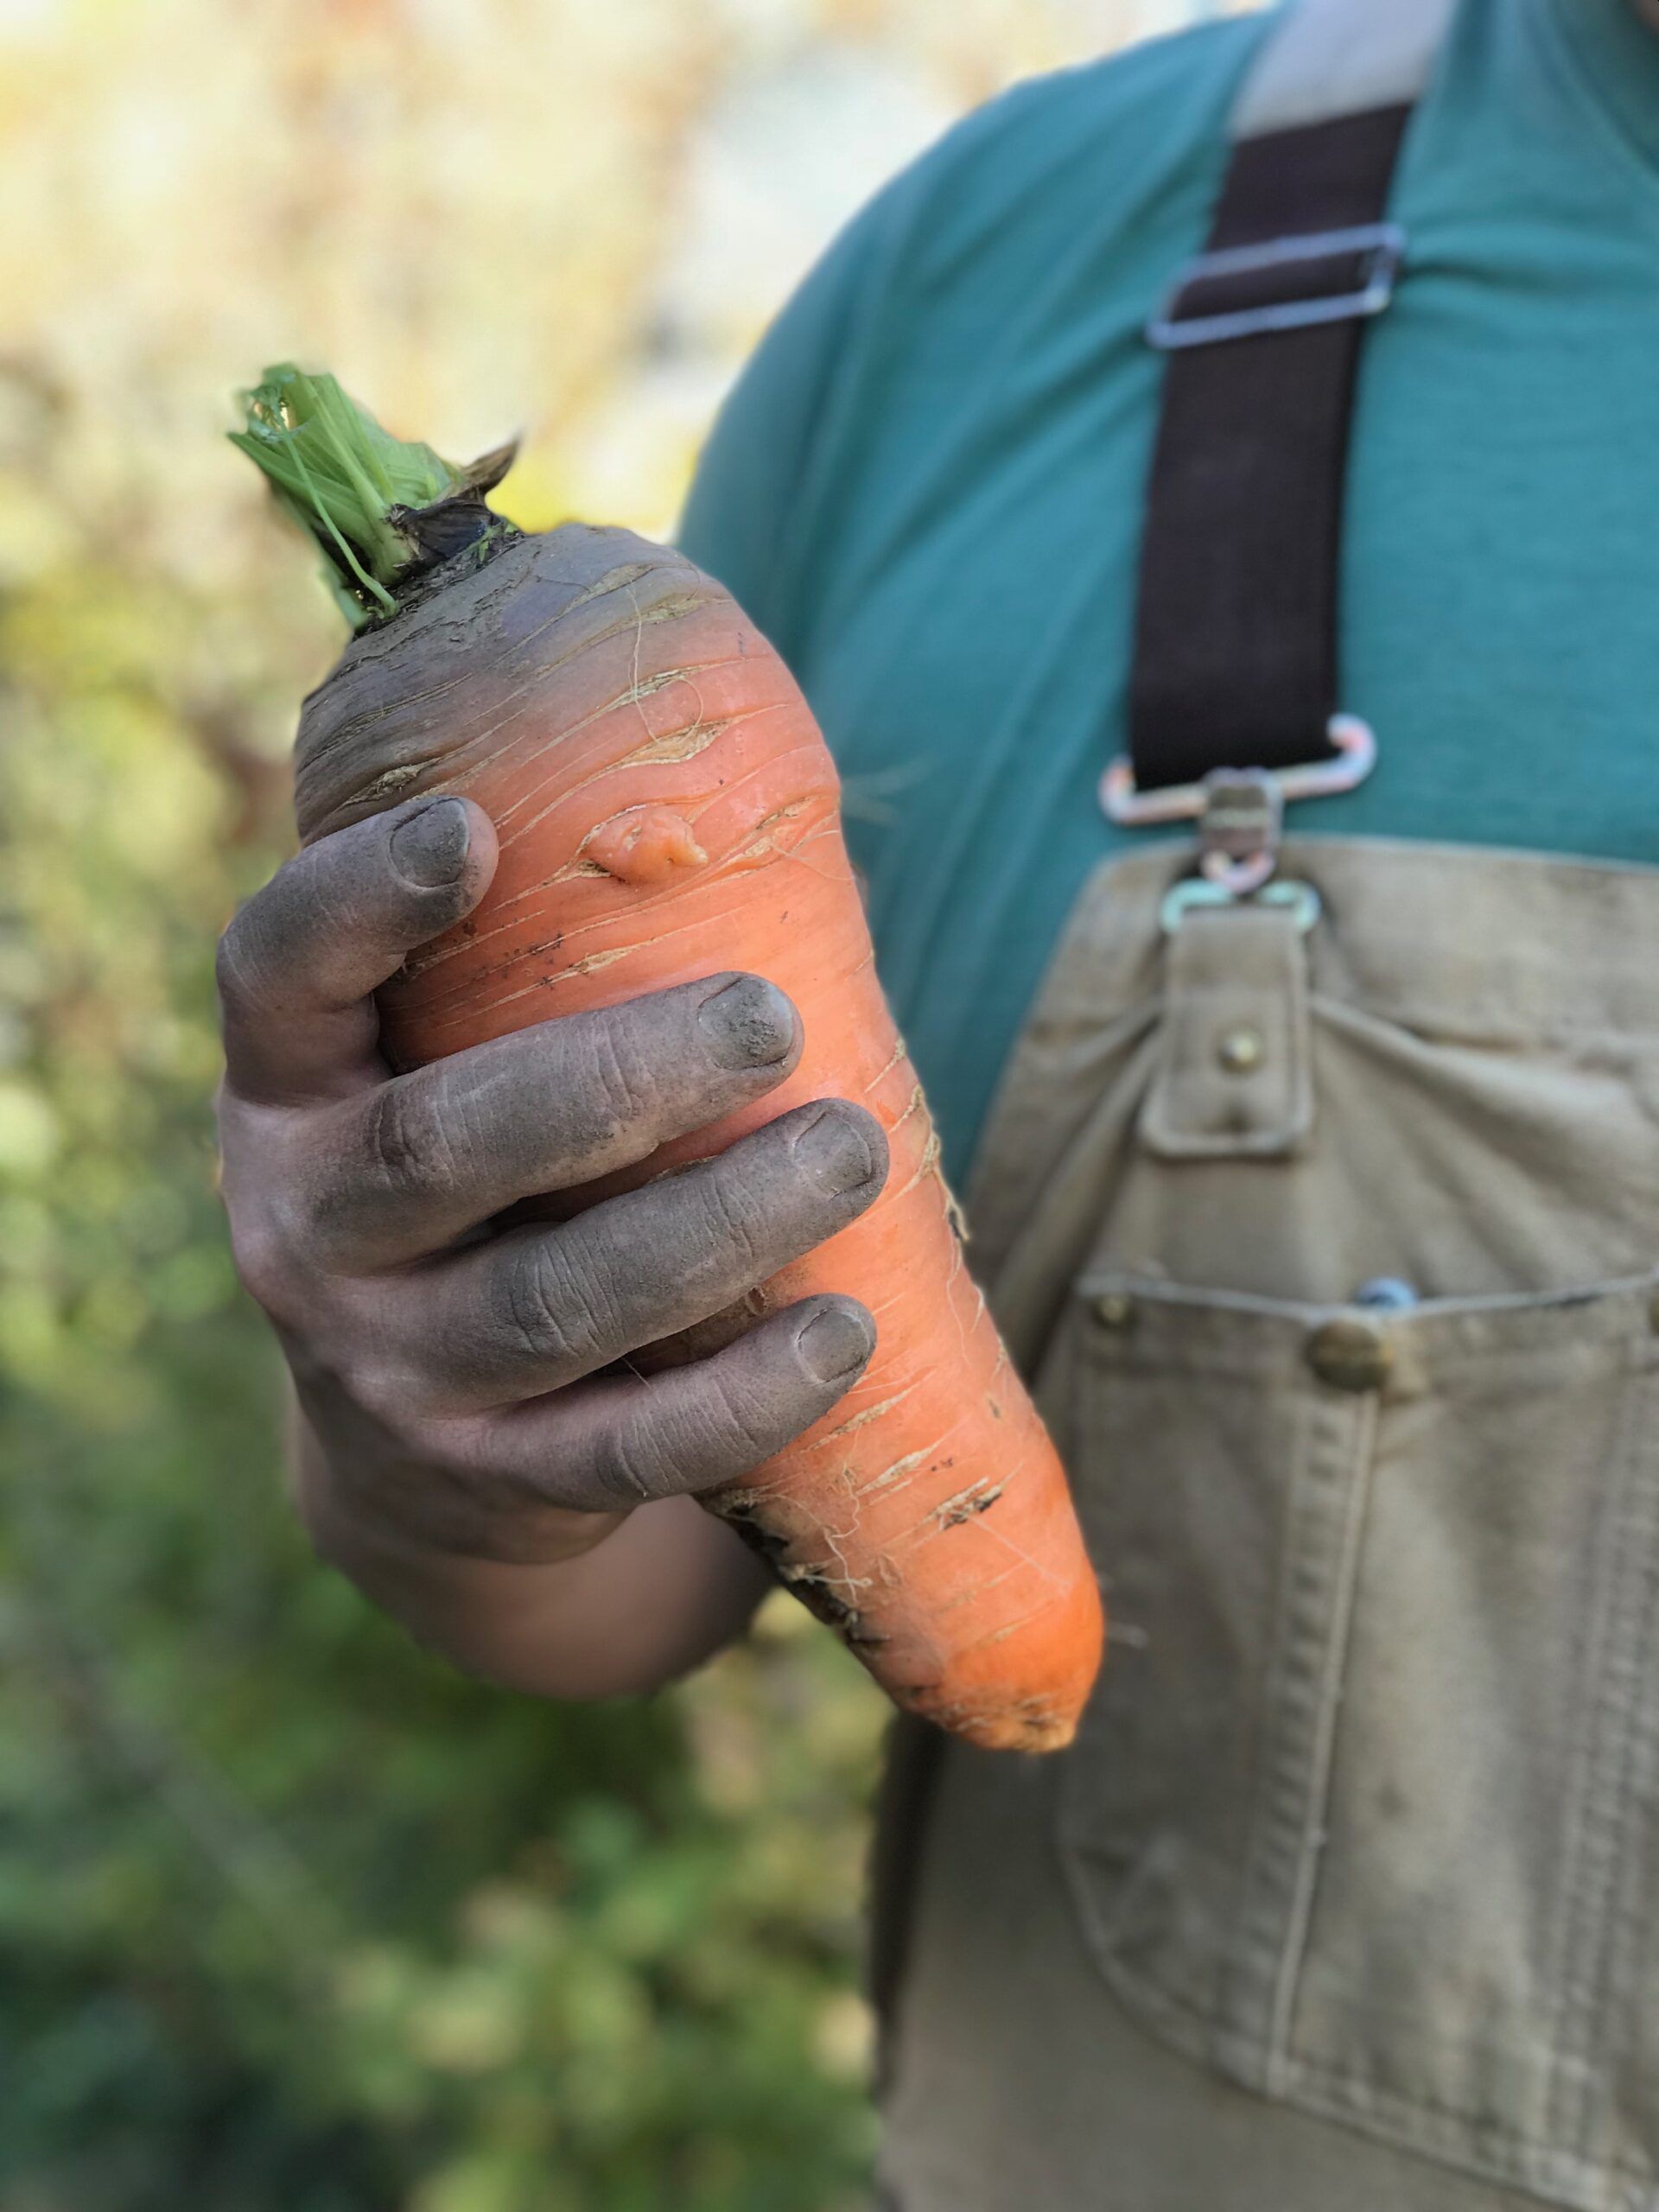 Karl holding one of the carrots he grew on his farm